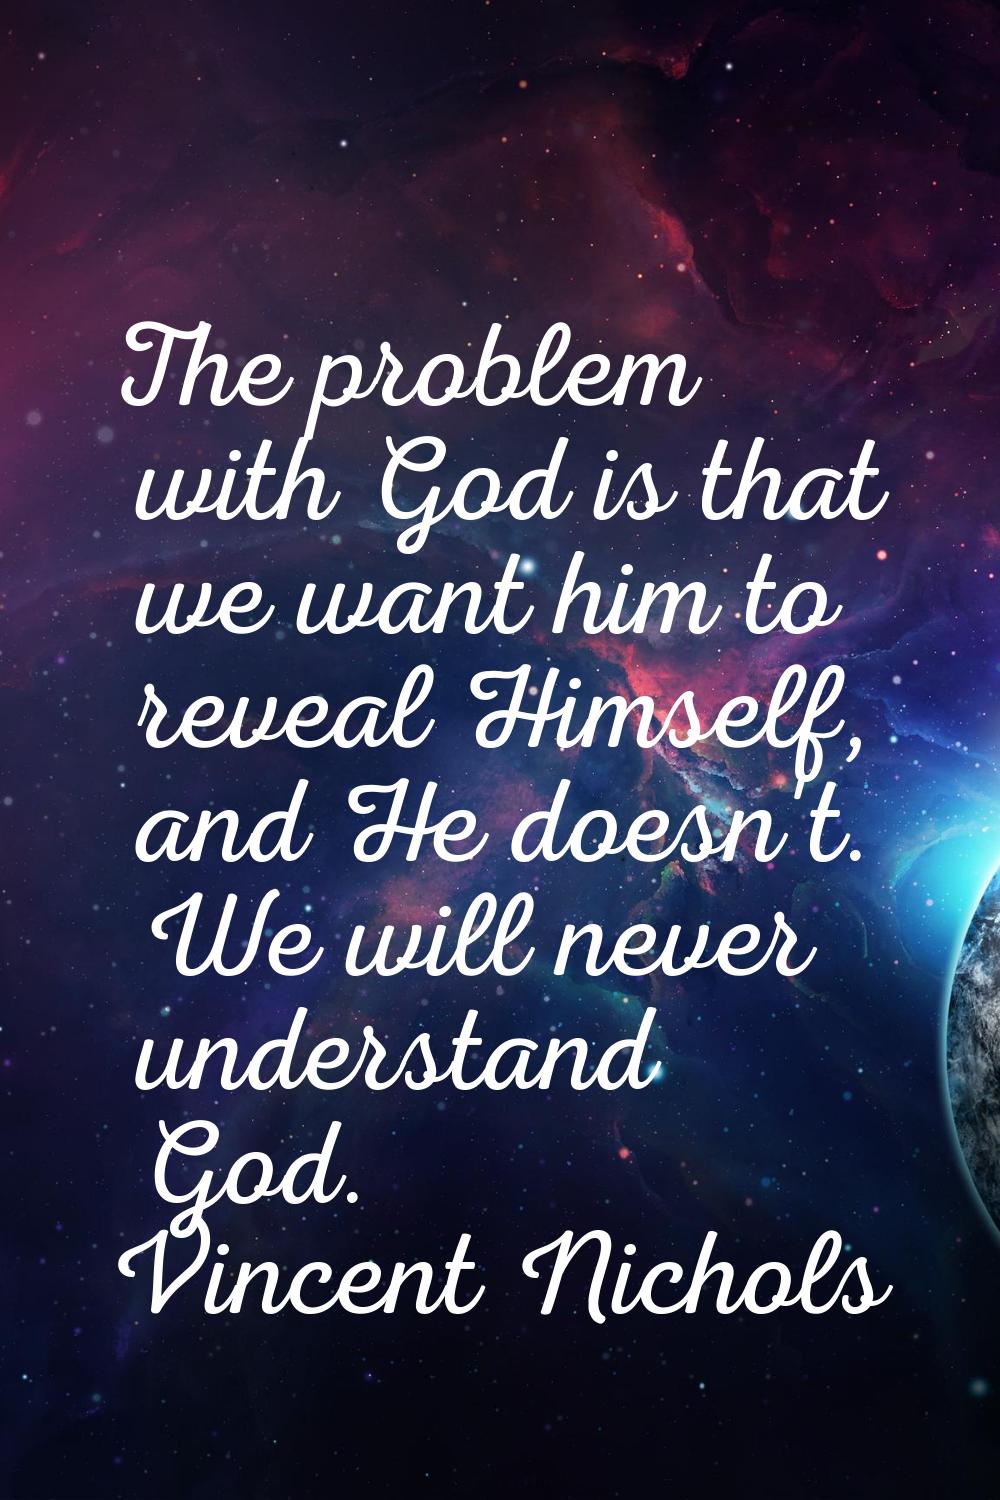 The problem with God is that we want him to reveal Himself, and He doesn't. We will never understan